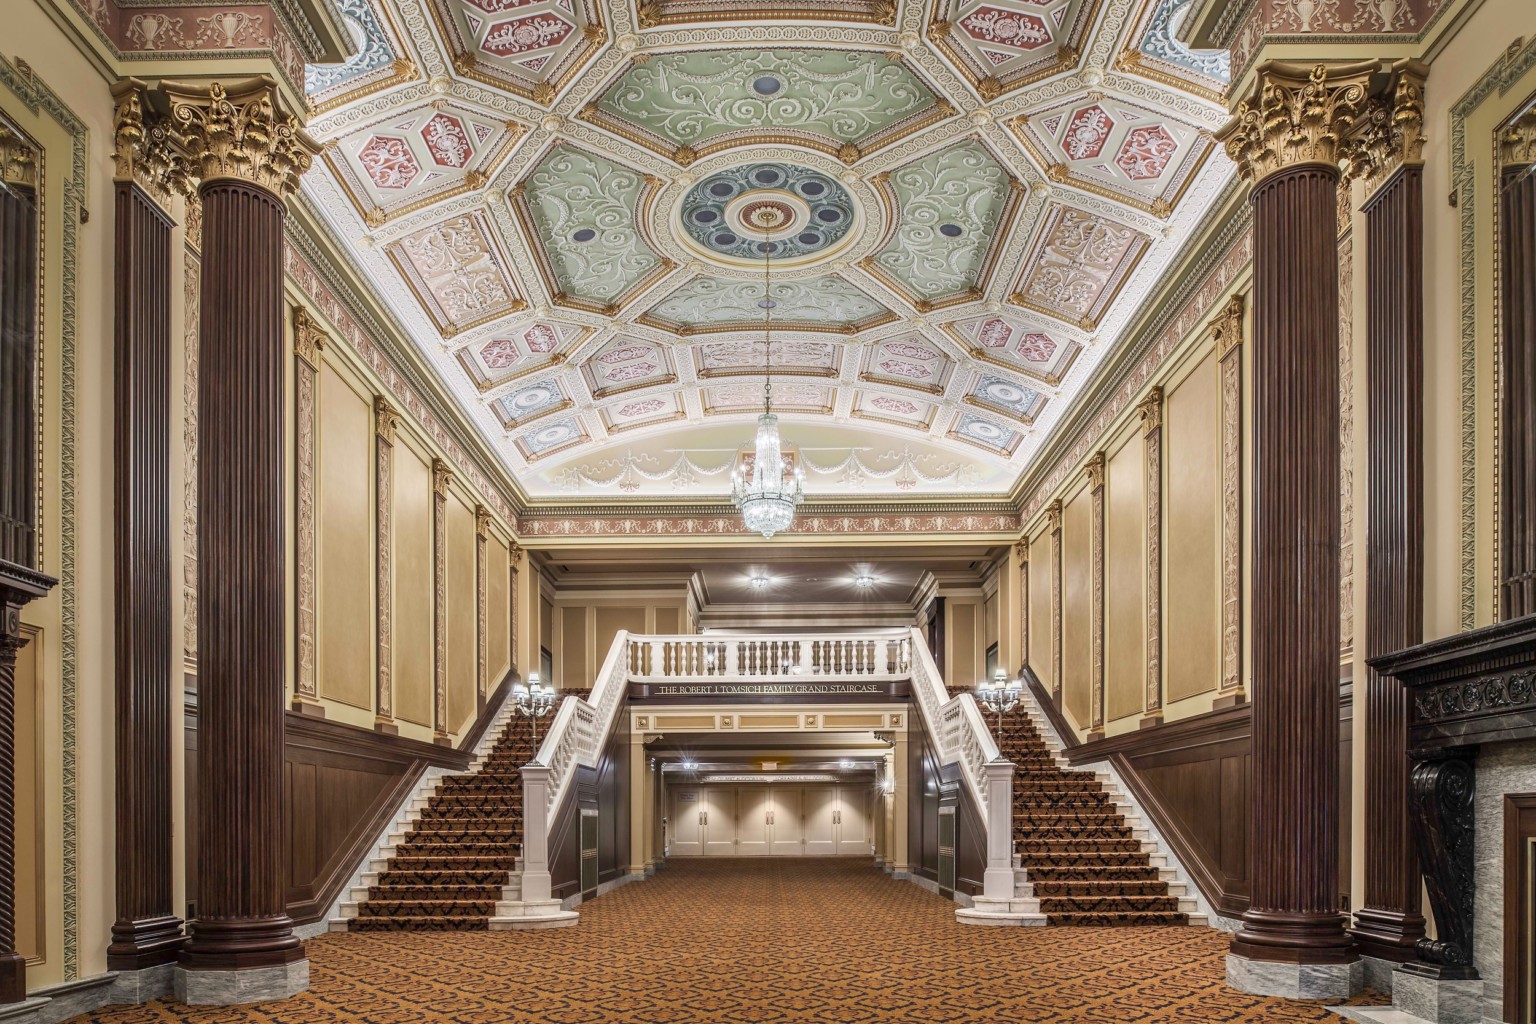 Grand staircase carpeted beneath ornate multicolored coffered ceiling with chandelier framed by ribbed pillars